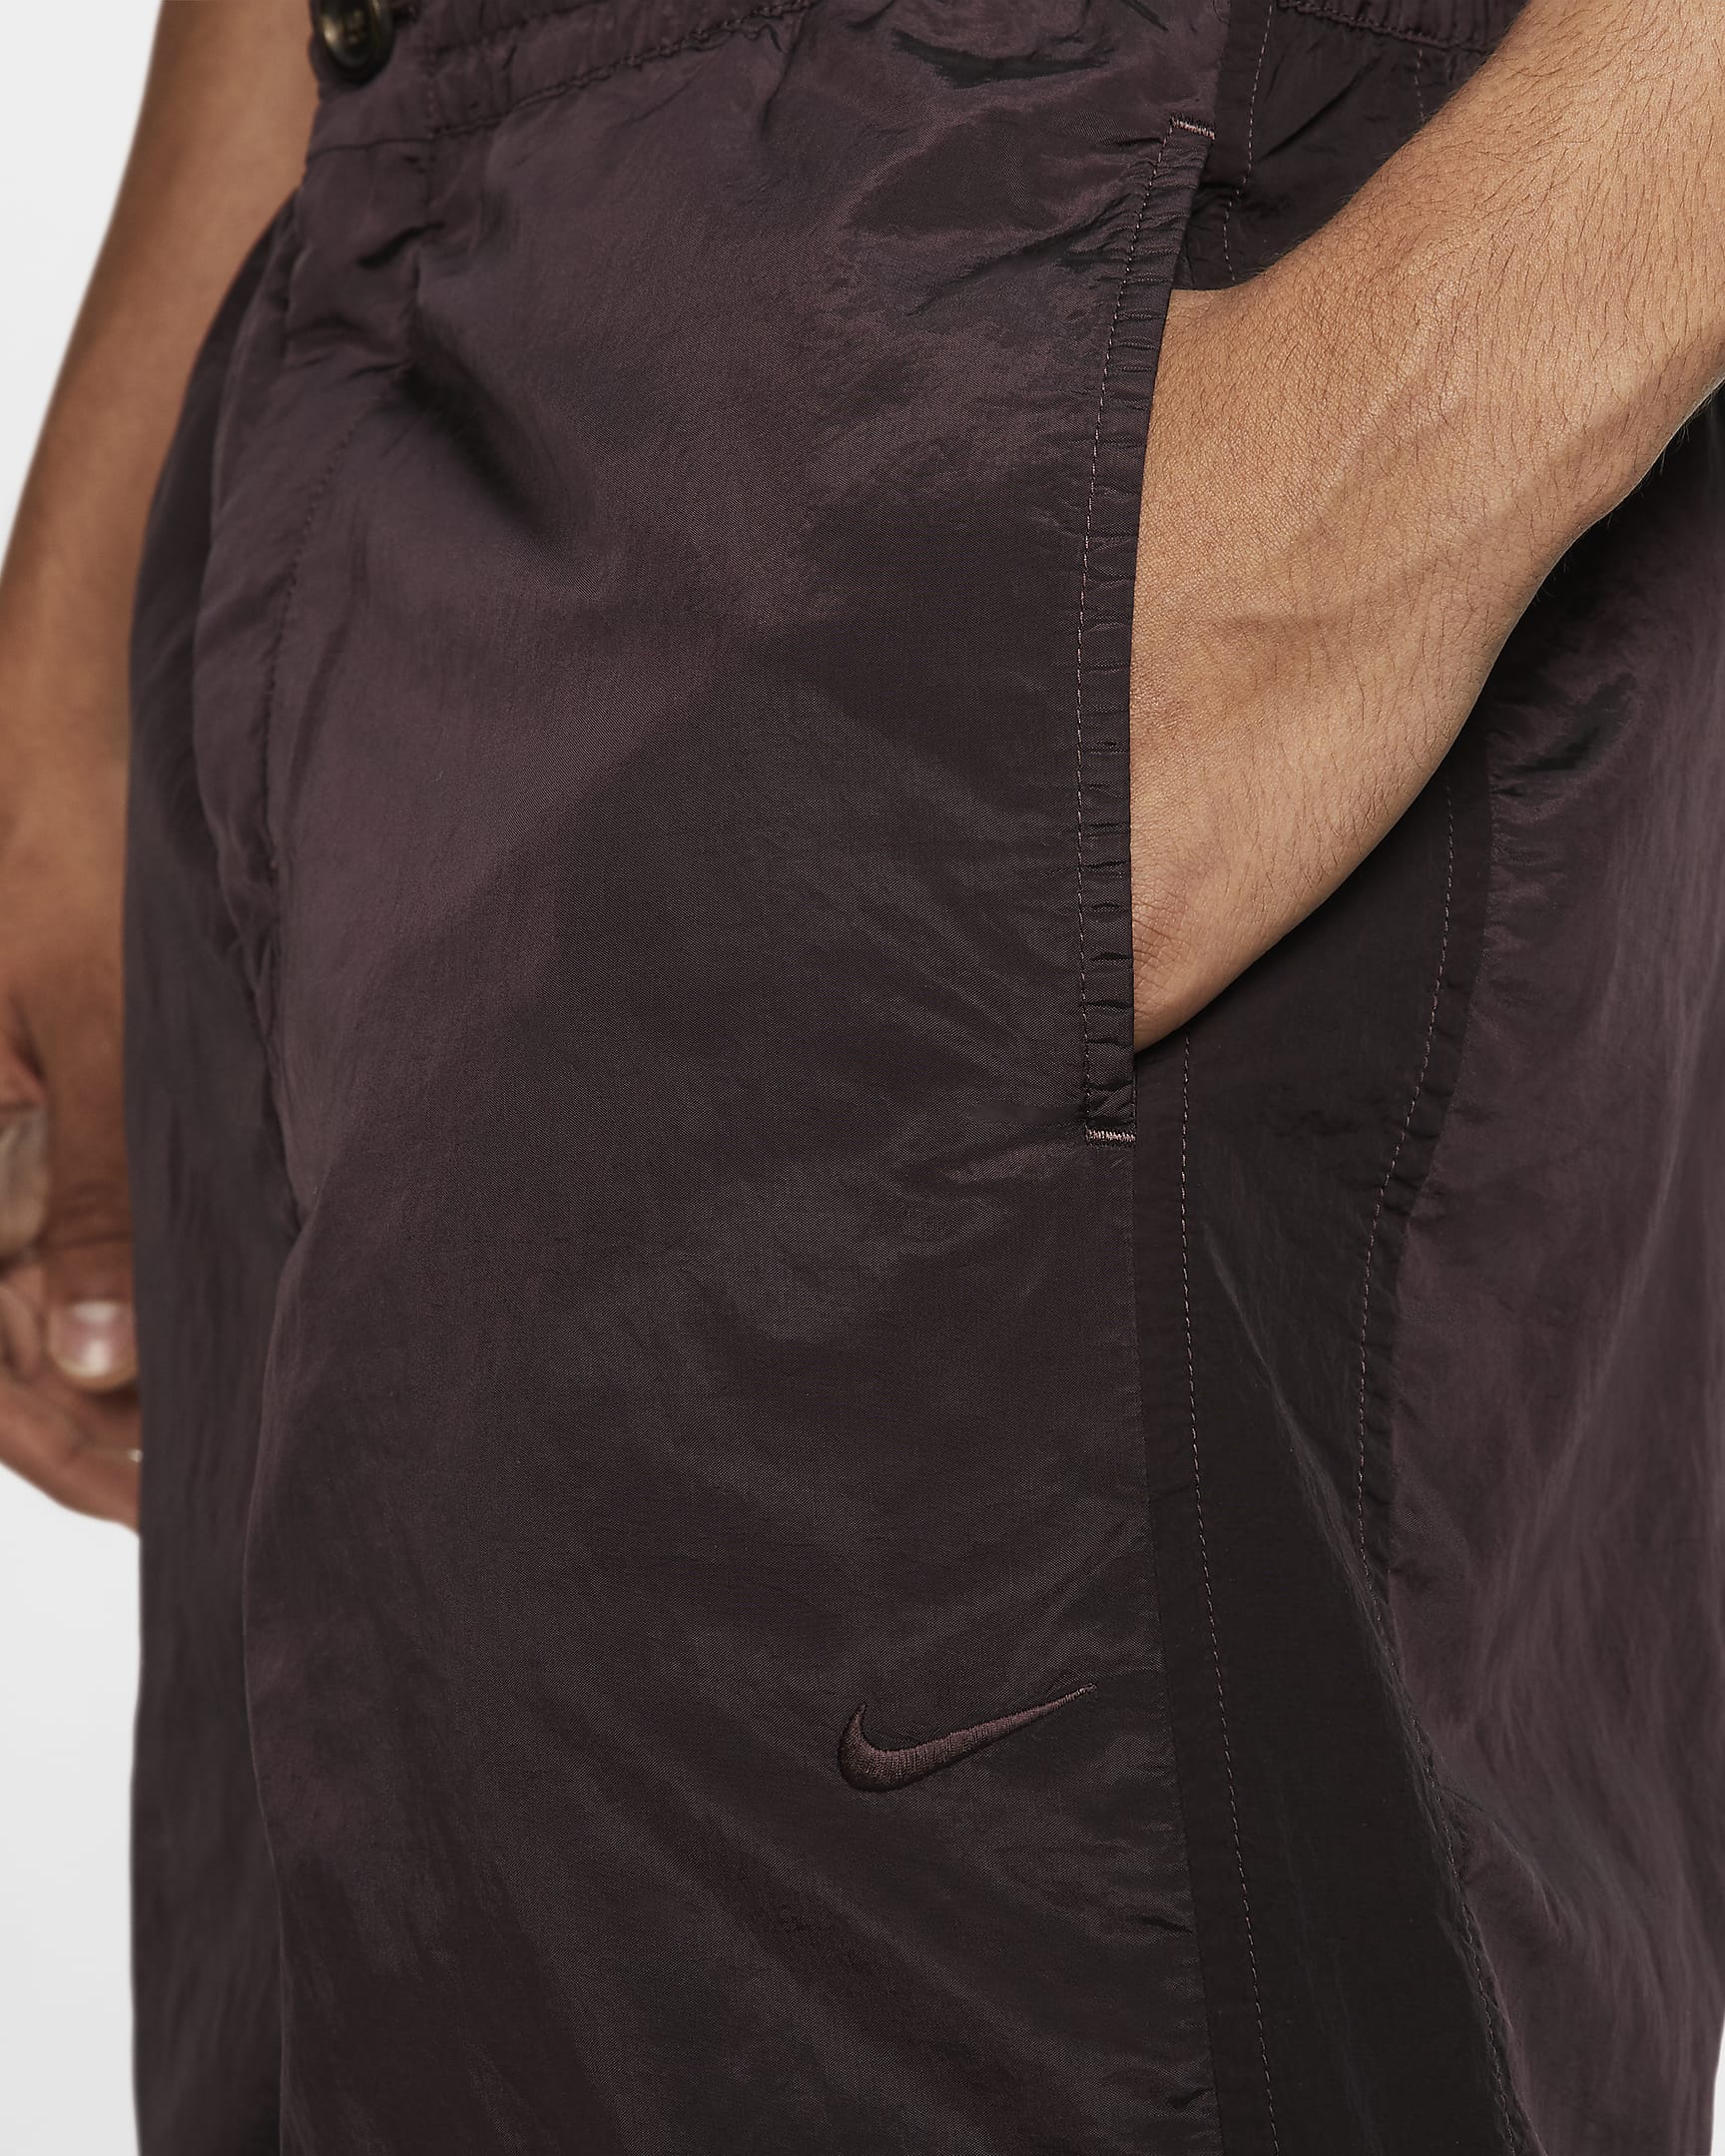 NikeLab Made in Italy Collection Men’s Shorts. Nike JP